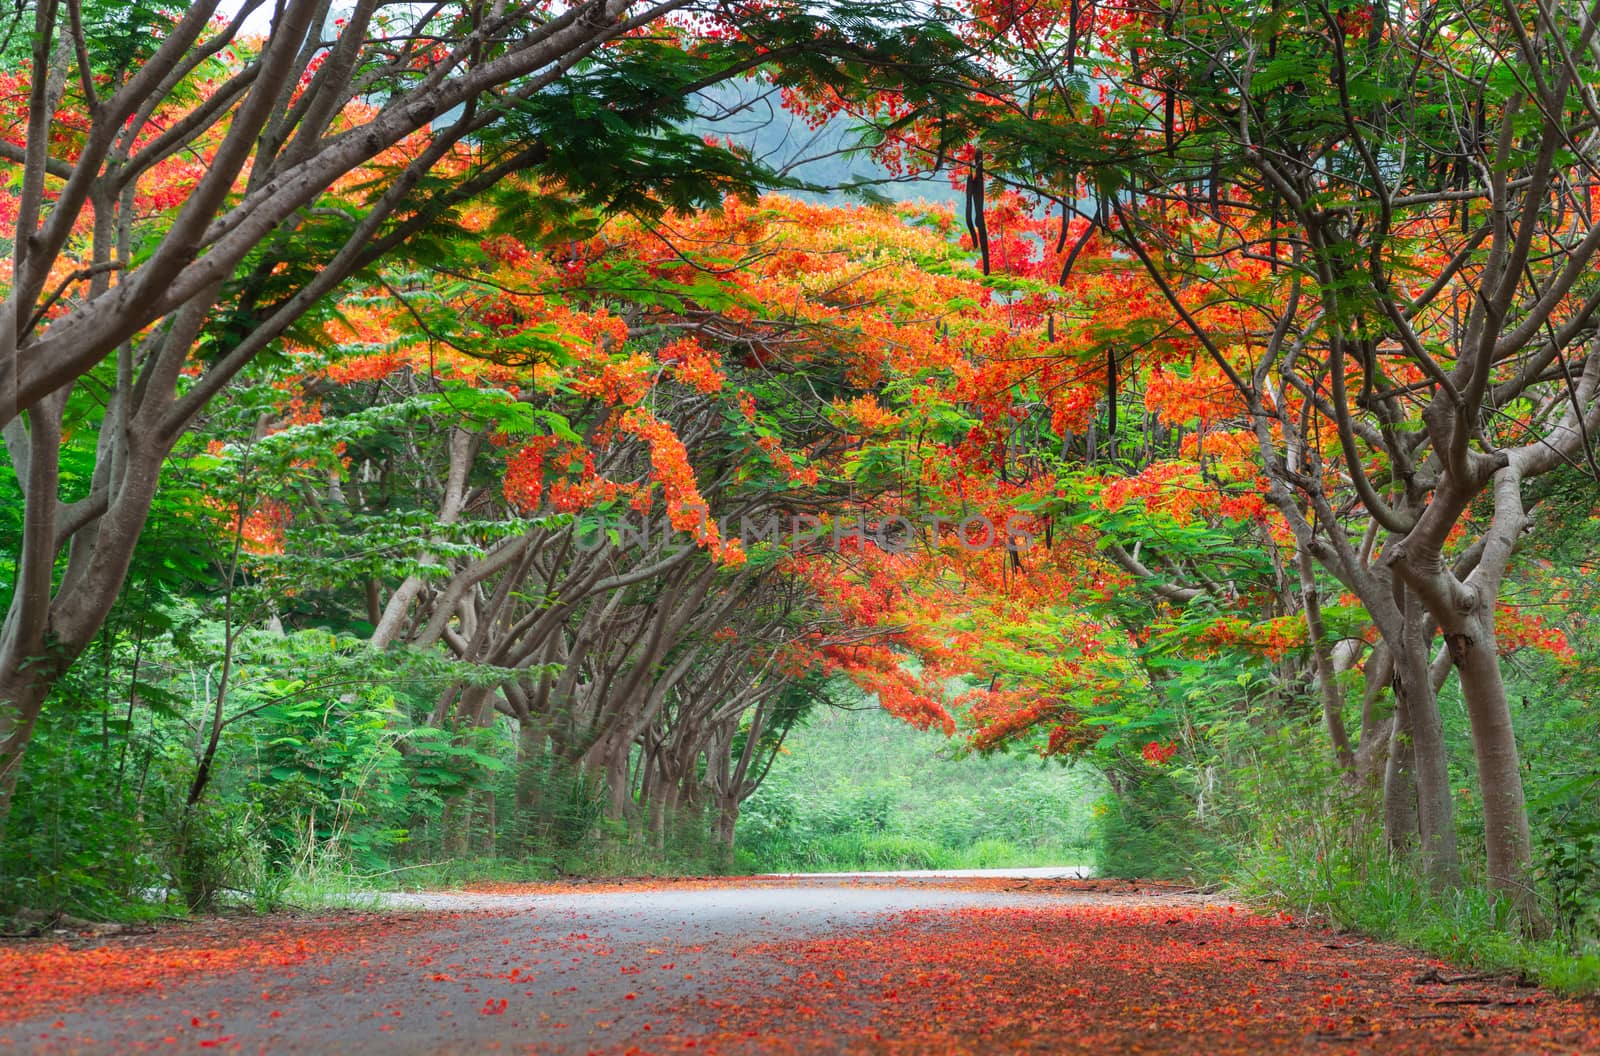 Scene of Flame Tree, Royal Poinciana or delonix regia in autumn season.  Red Flower bloom over road or street